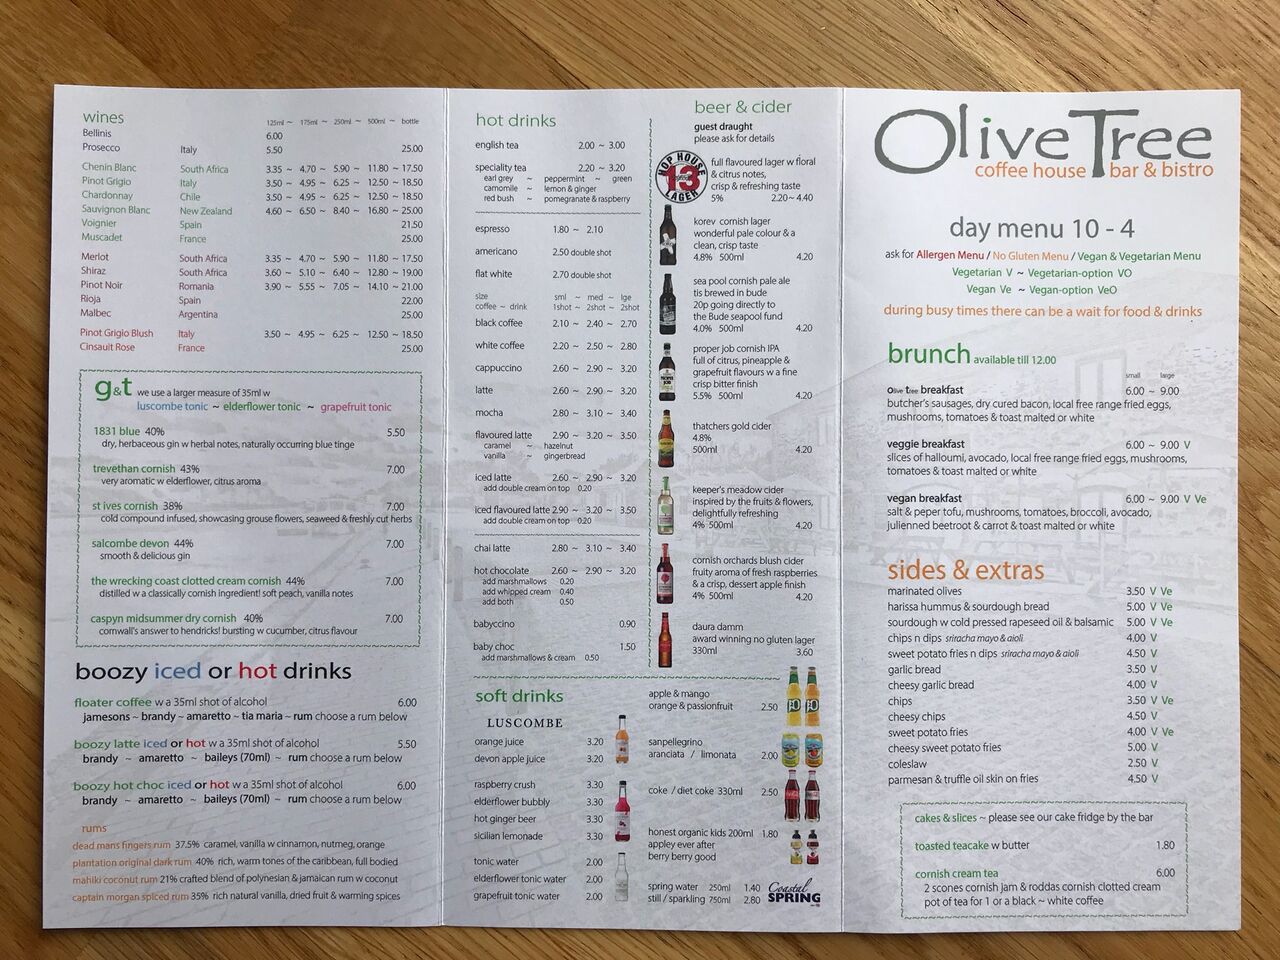 A photo of Olive Tree